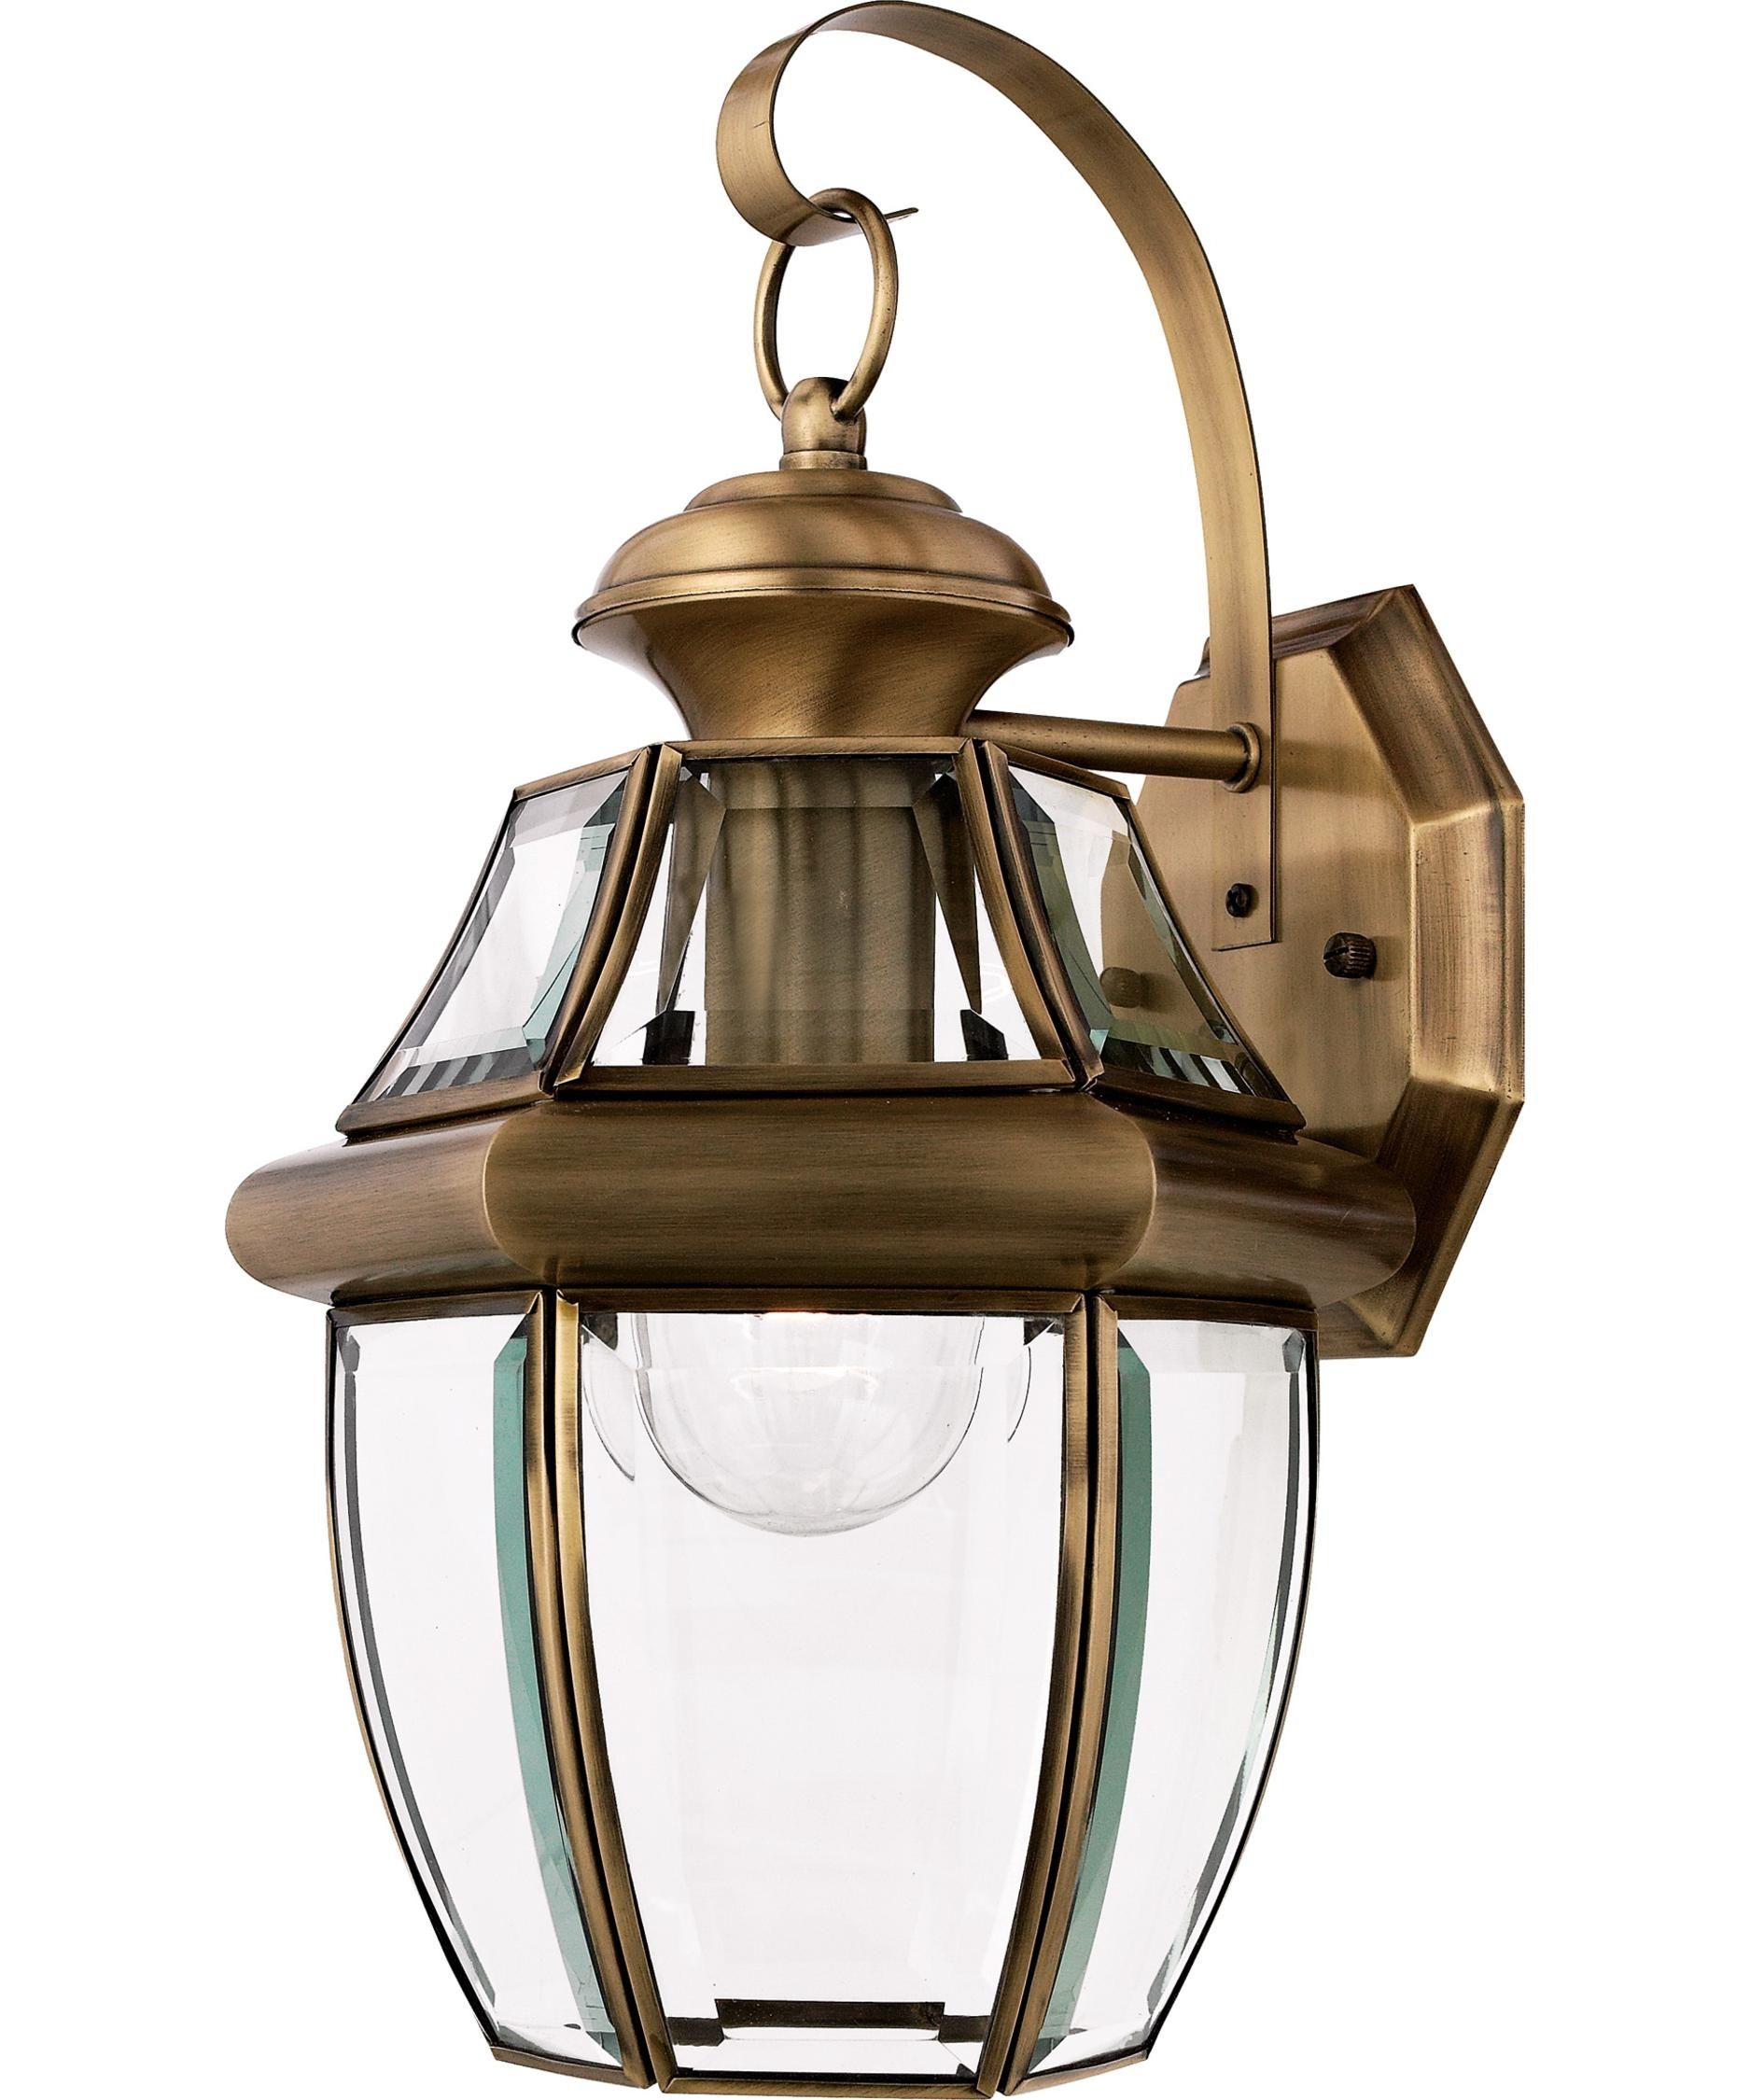 Quoizel Ny8316 Newbury 9 Inch Wide 1 Light Outdoor Wall Light For Quoizel Outdoor Wall Lighting (View 7 of 15)